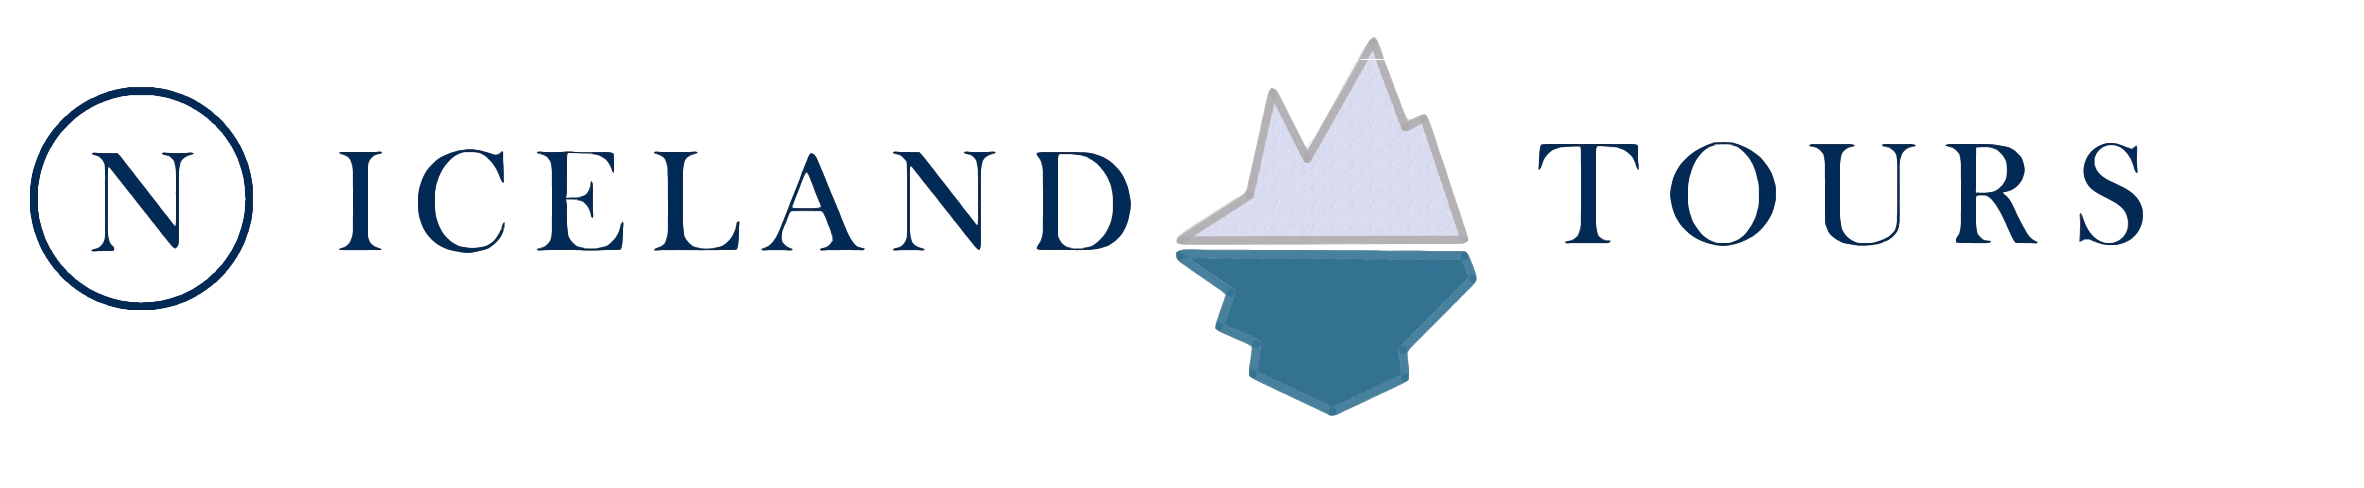 NICELAND FOR PUBLISHER LOGO_clipped_rev_1 LAST UPDATED_clipped_rev_3.png